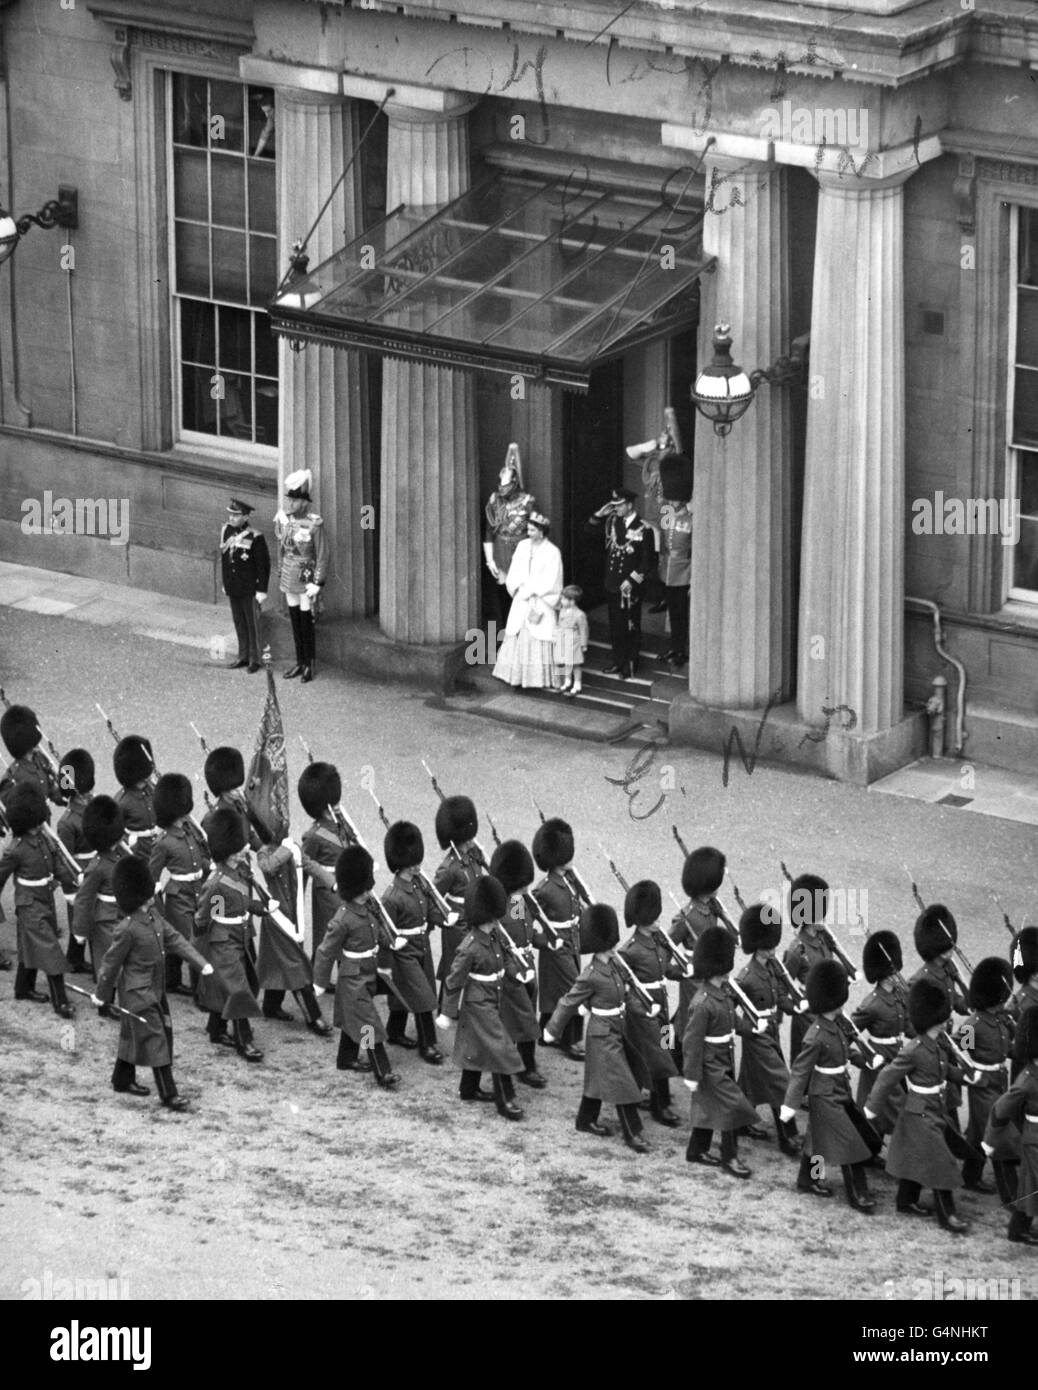 Queen Elizabeth II with Prince Charles beside her, watches troops of her Brigade of Guards march past in the Quadrangle of Buckingham Palace, as the Duke of Edinburgh in naval uniform, salutes. The Queen and Duke had just returned from the House of Lords, where the Queen opened the first Parliament of her Reign. Stock Photo